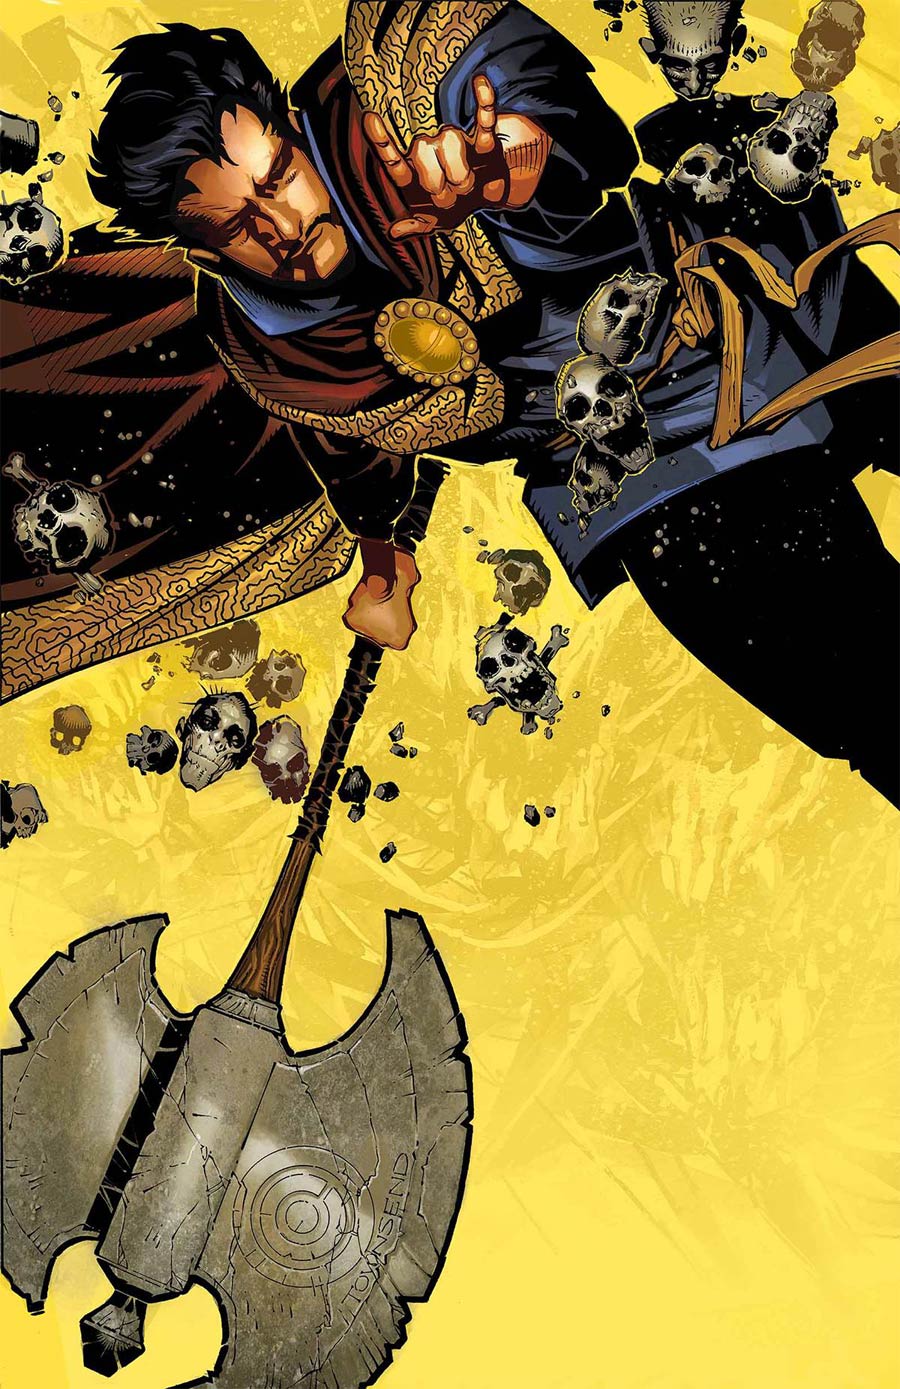 Doctor Strange Vol 4 #1 By Chris Bachalo Poster